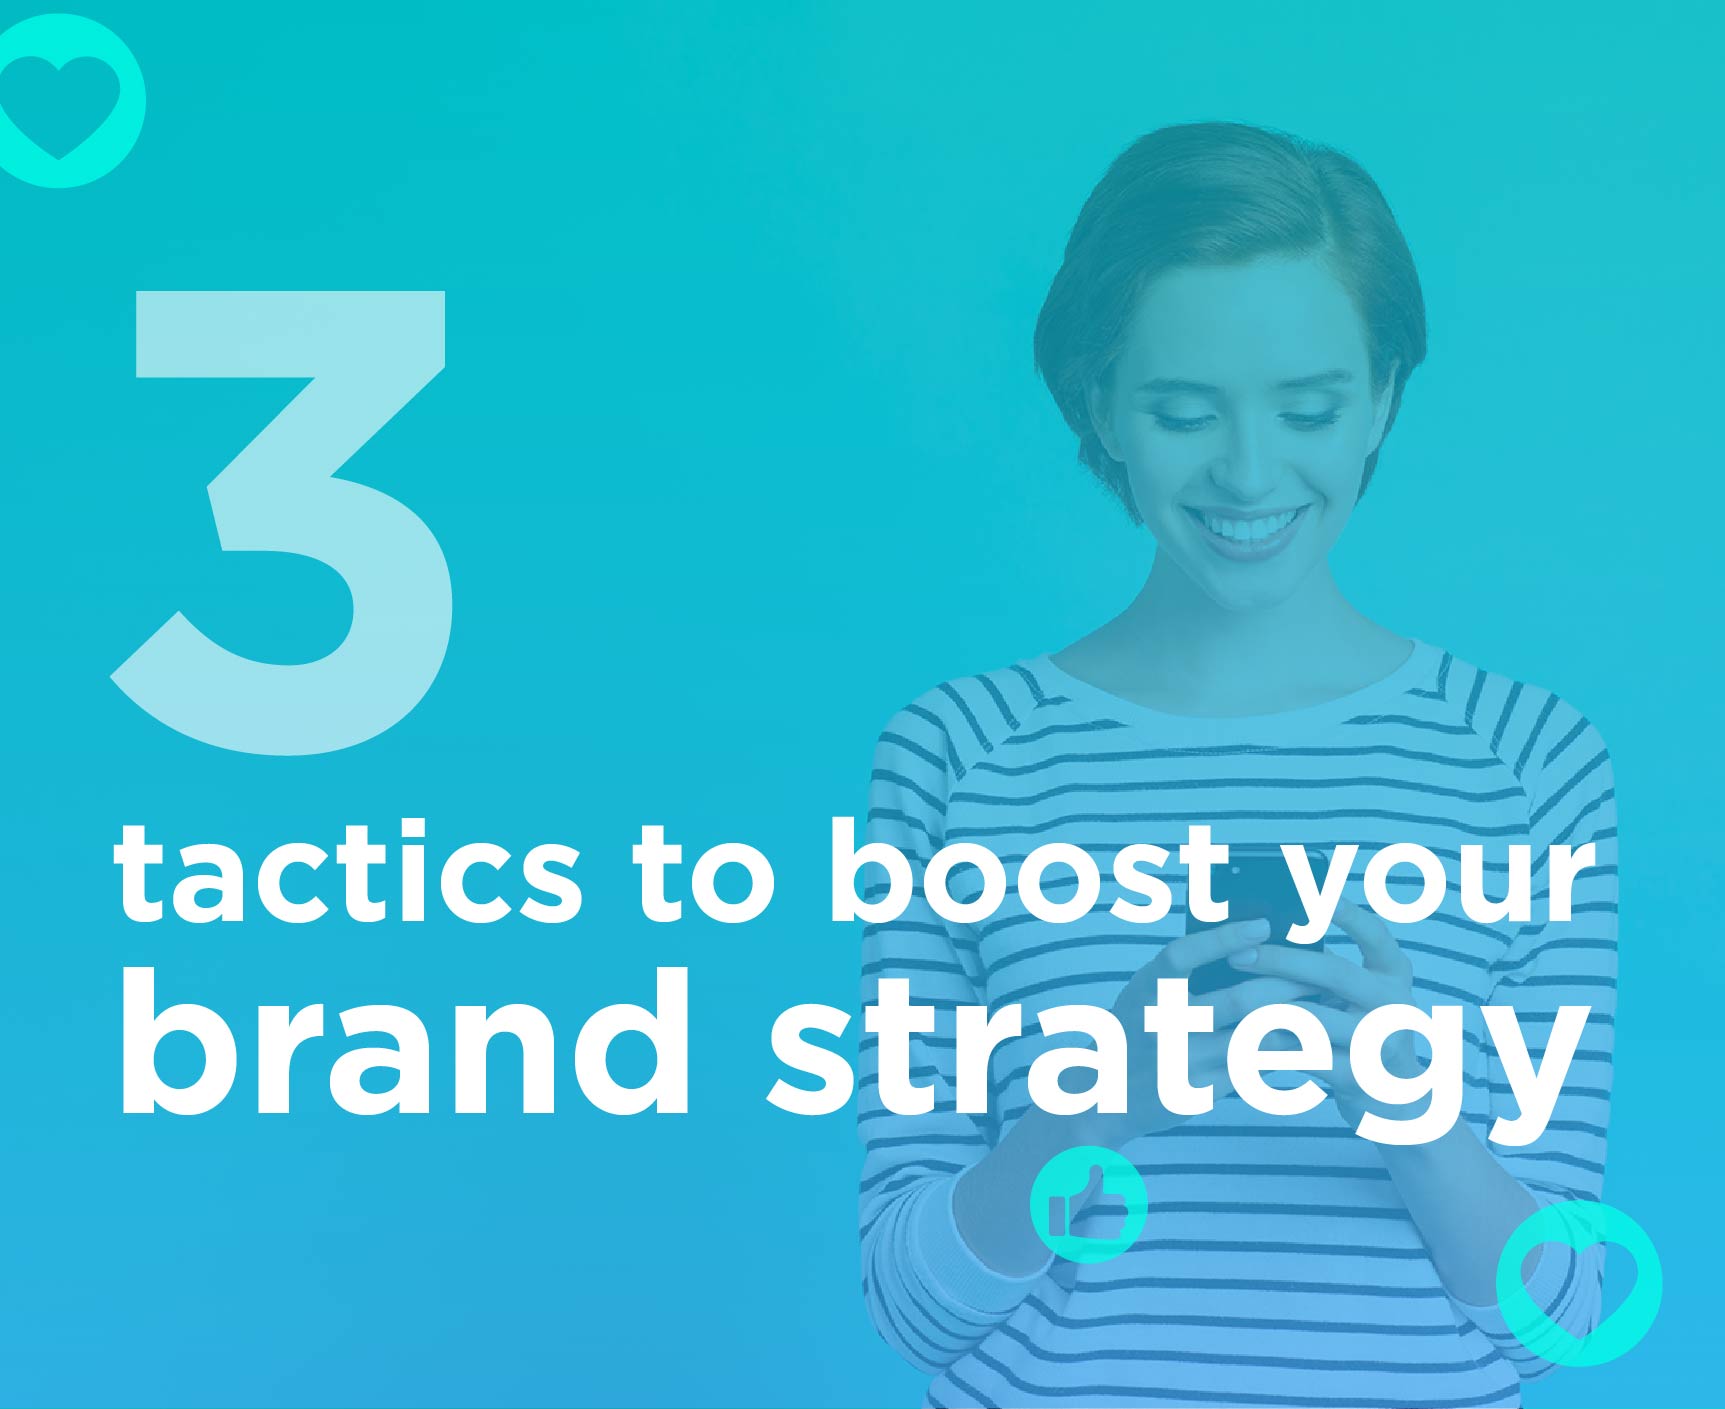 Three Tactics to Boost Your Brand Strategy